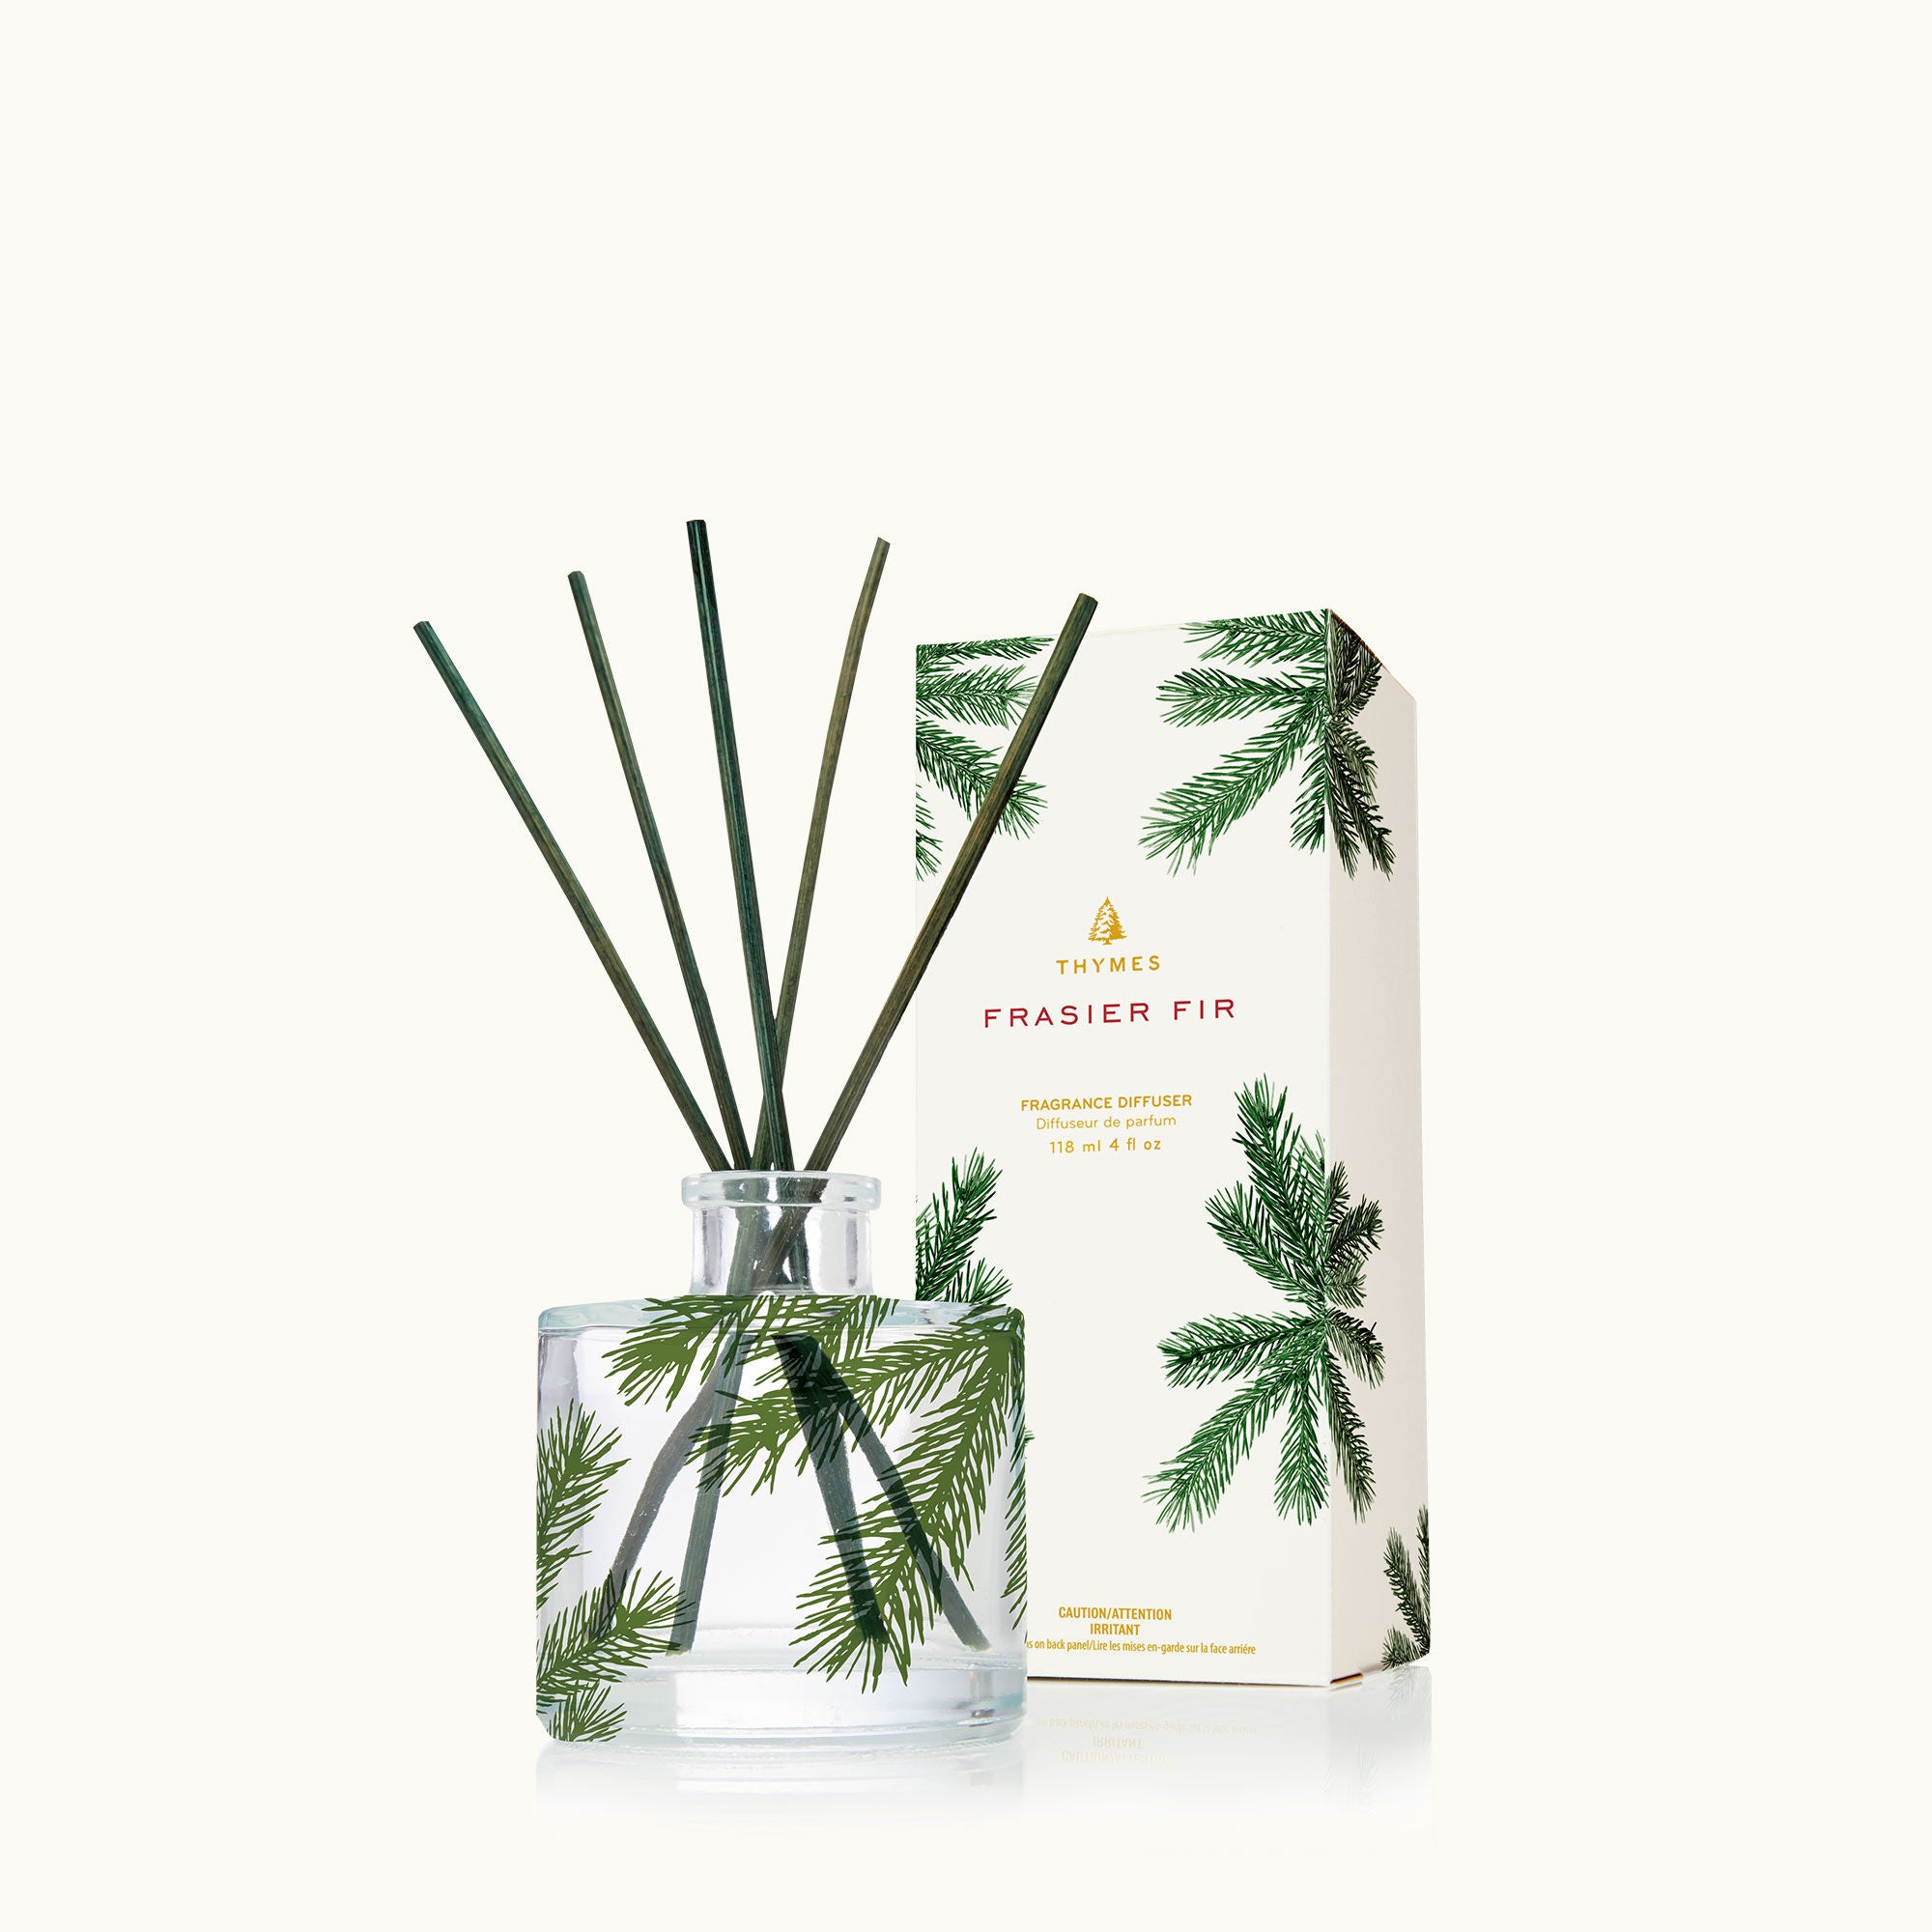 Thymes Frasier Fir Reed Diffuser - Petite Pine Needle